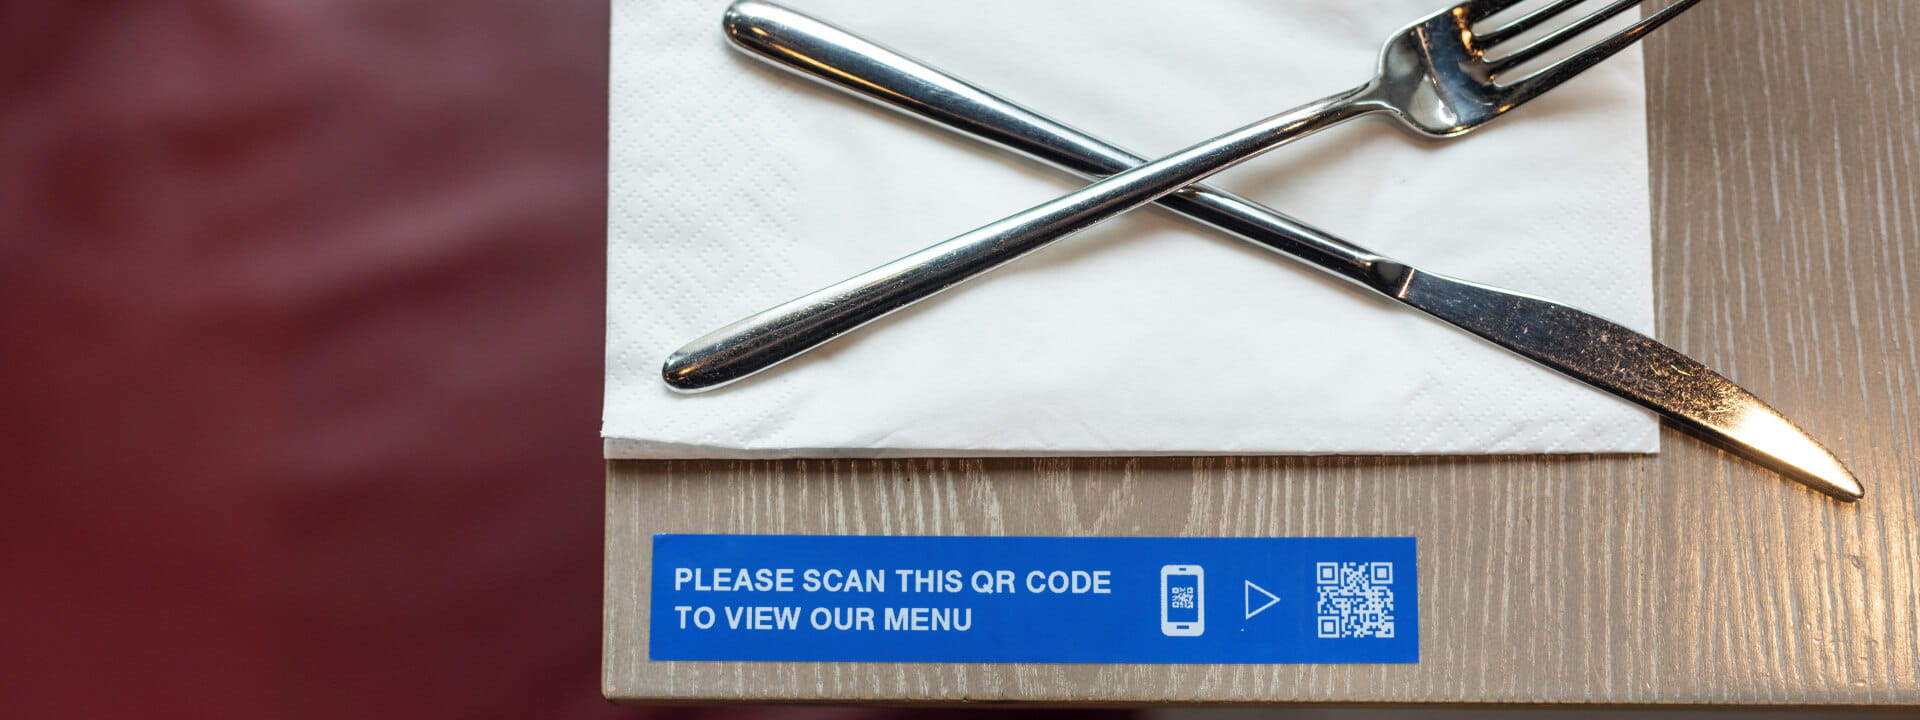 A knife and fork on a serviette with a QR code menu on a label in a restaurant.